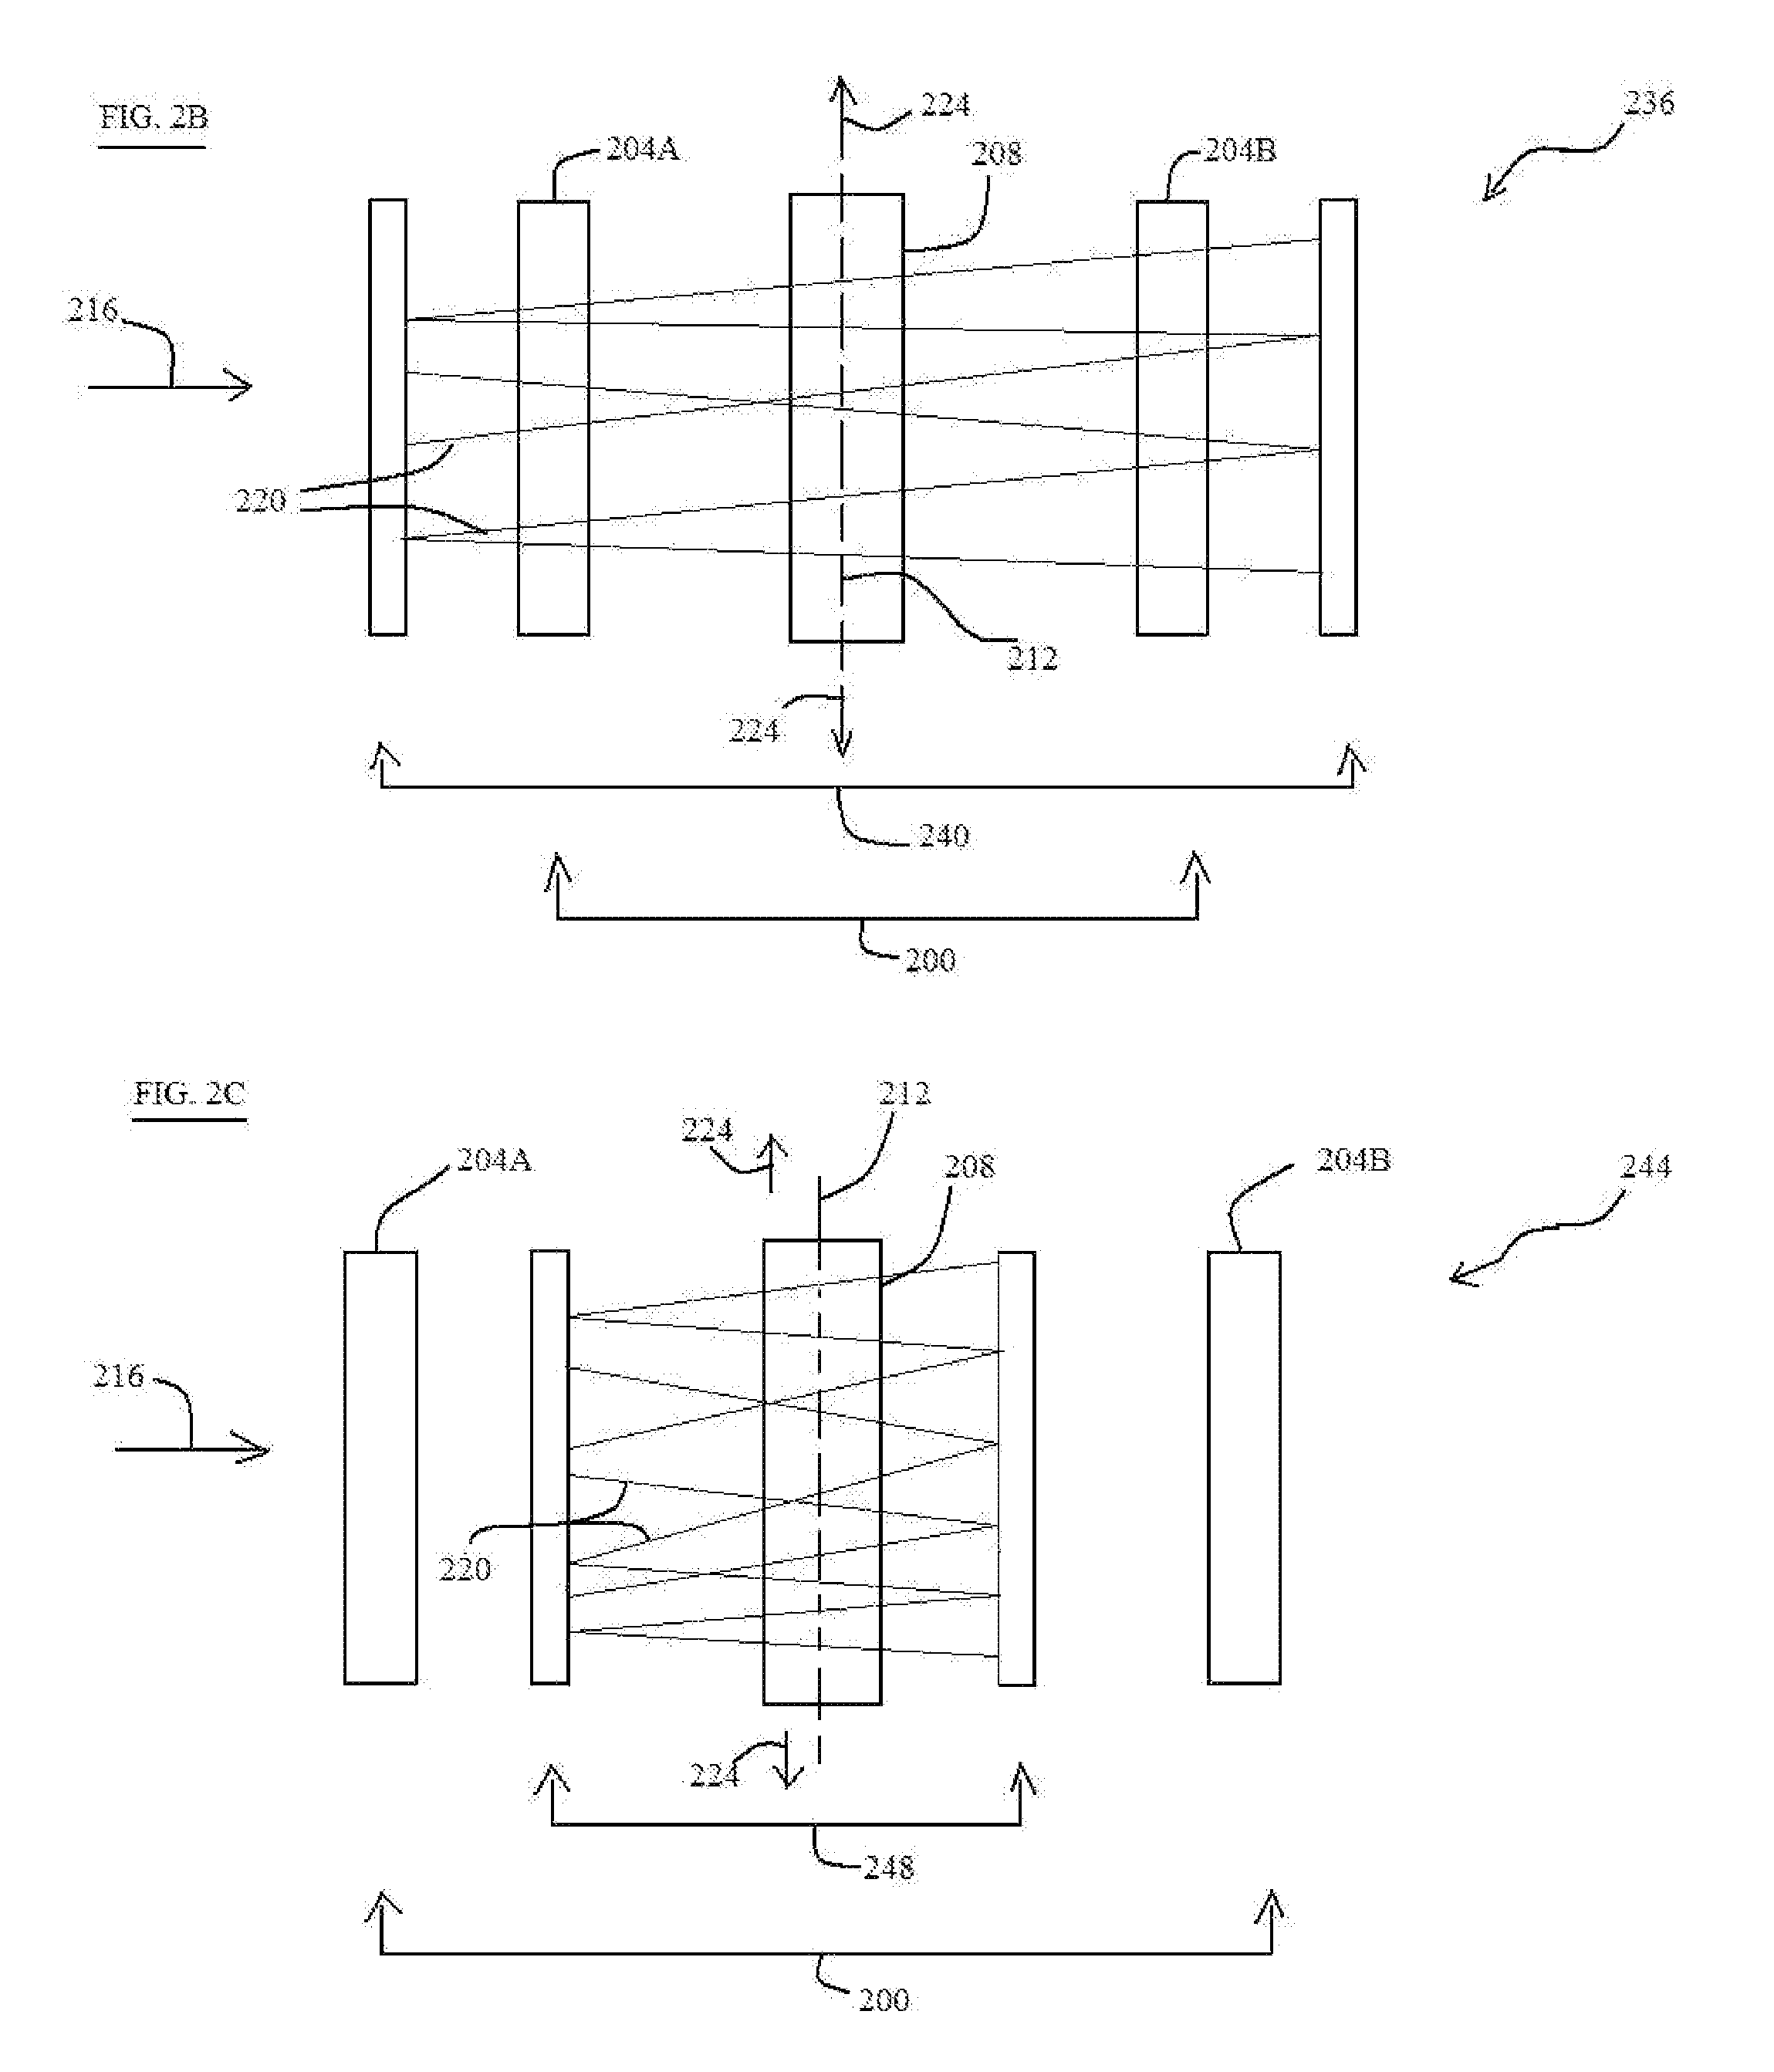 Optically Surface-Pumped Edge-Emitting Devices and Systems and Methods of Making Same